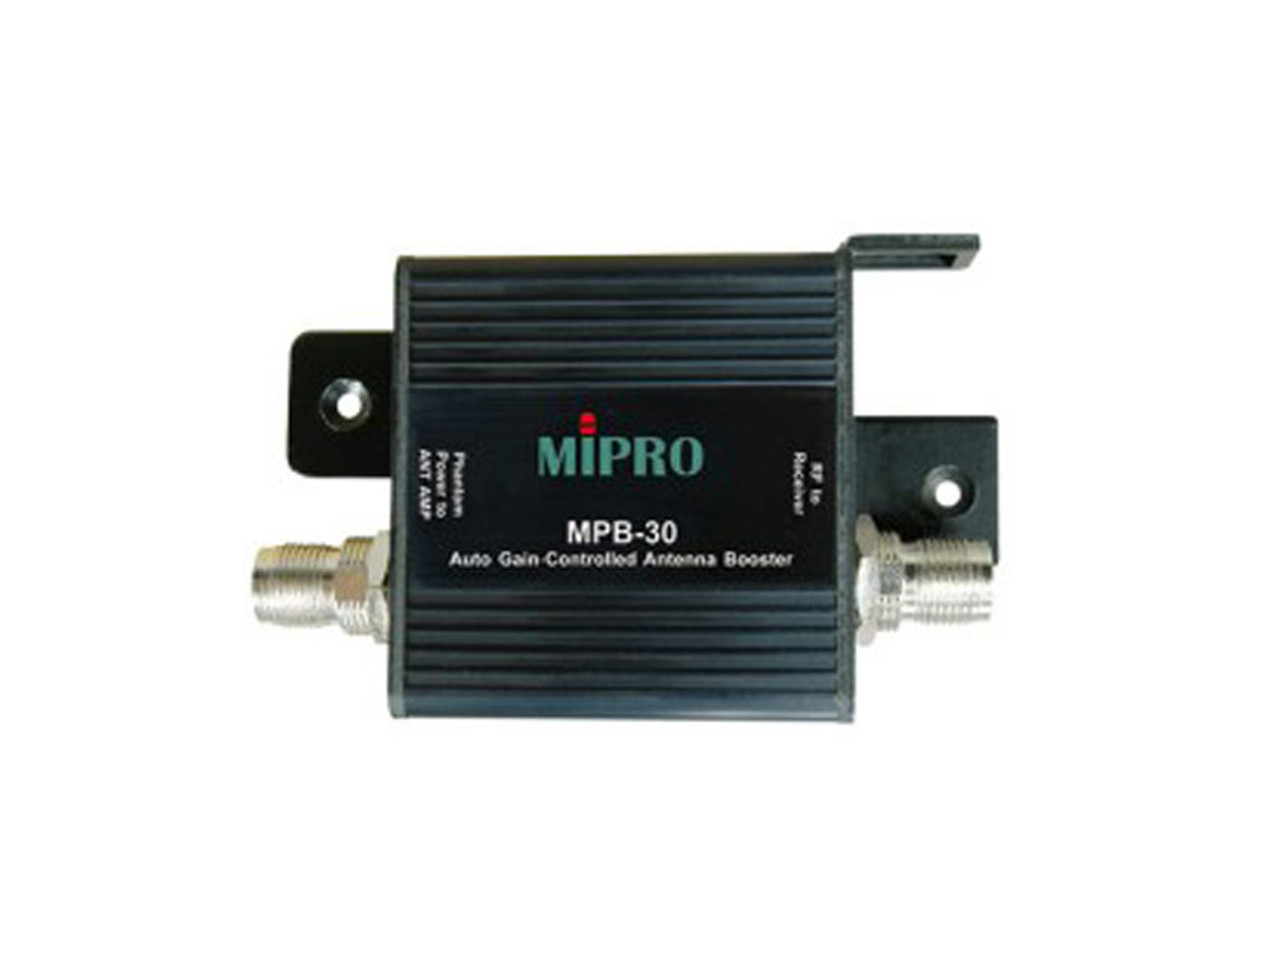 Avlex MPB-30 UHF Auto Gain Controlled Booster & Power Supply